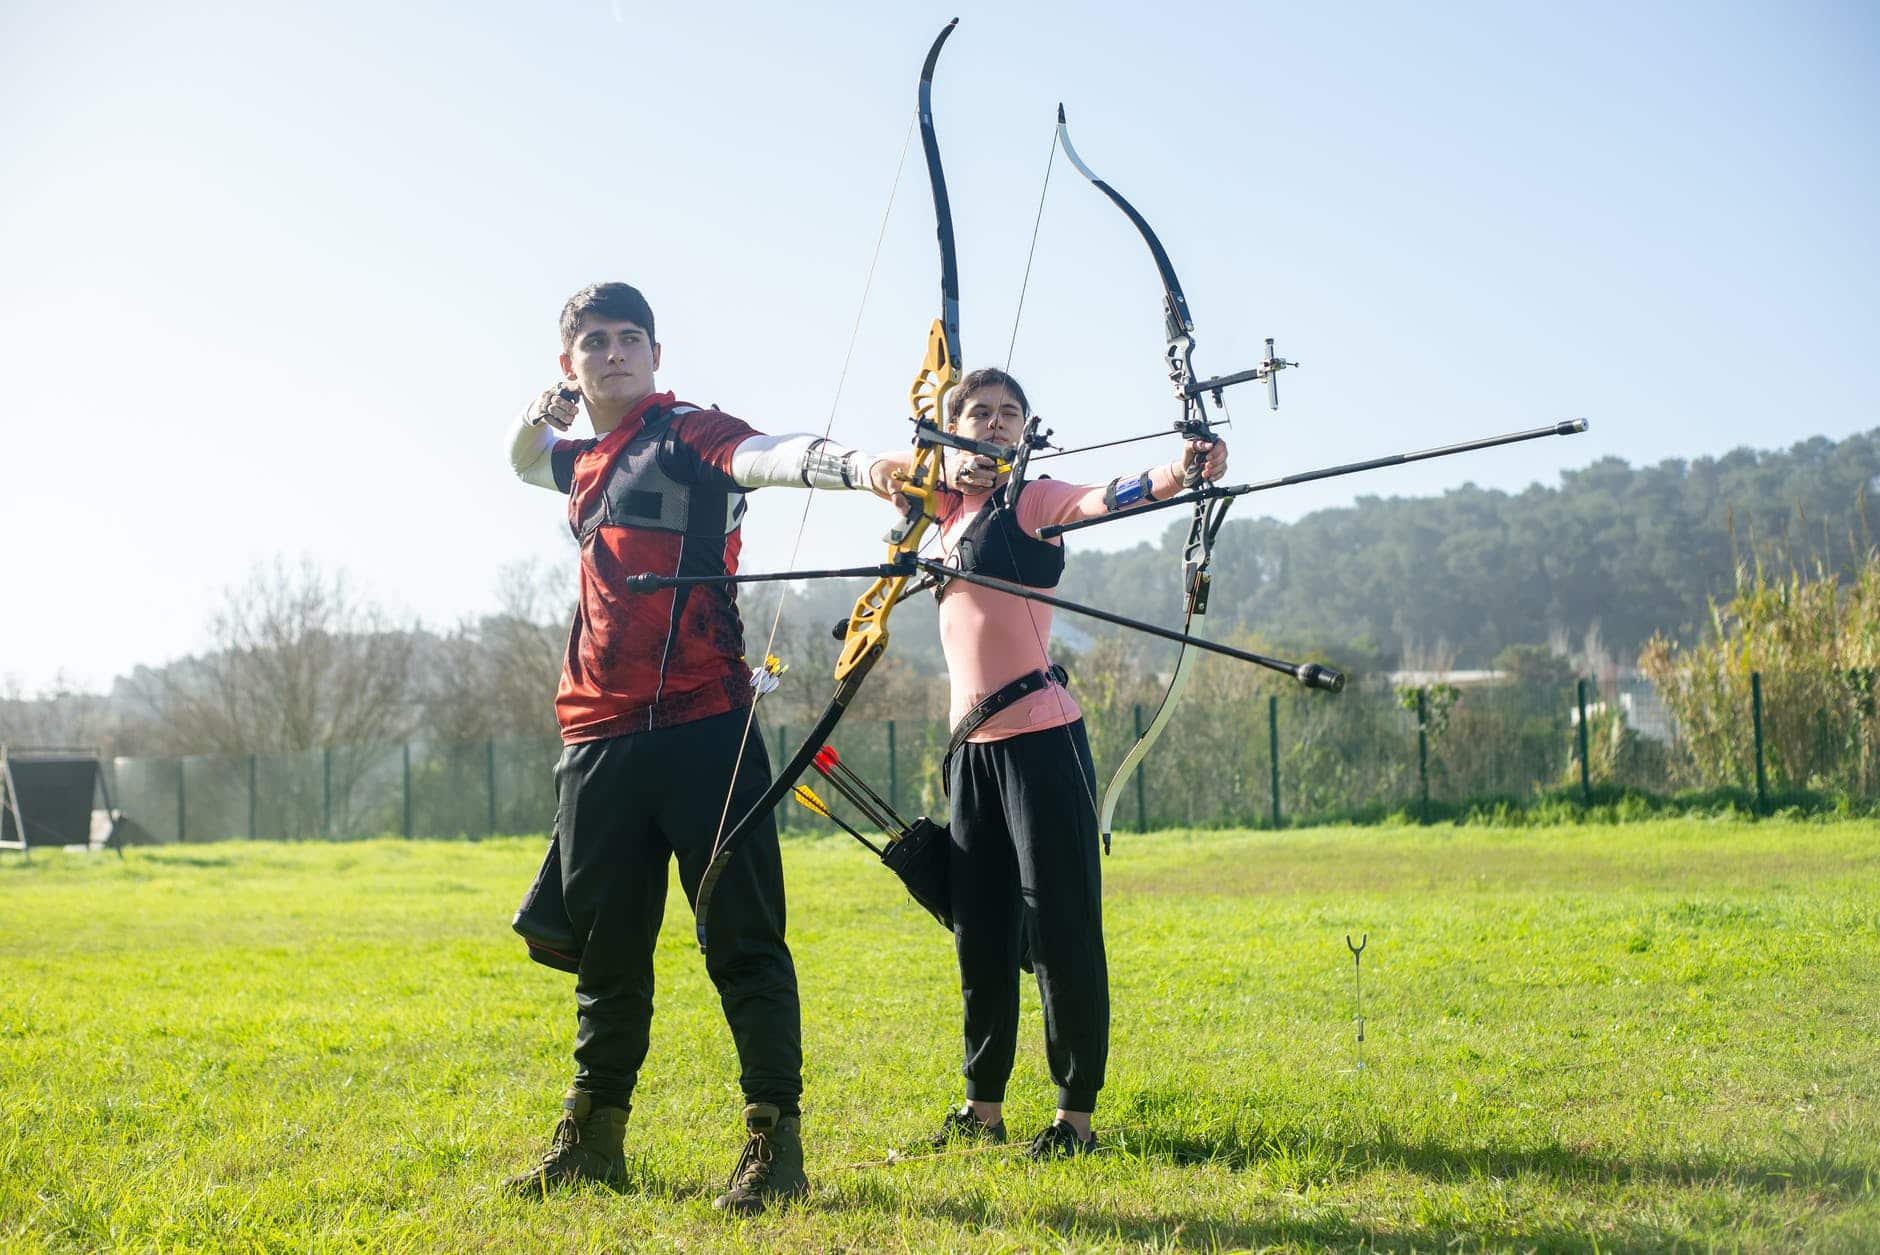 different types of archery